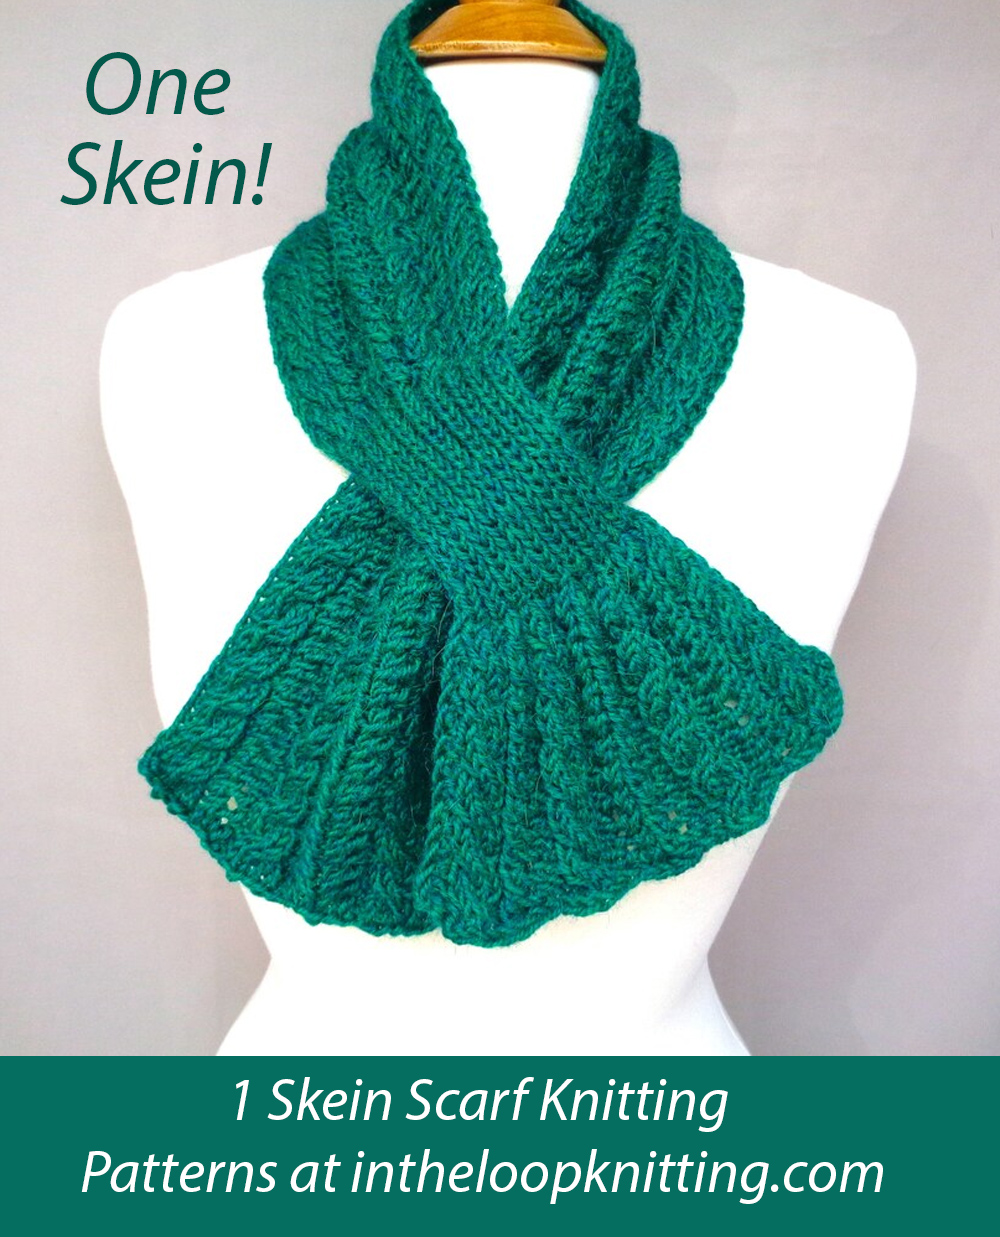 One Skein Kelly Keyhole Scarf with Cables Knitting Pattern